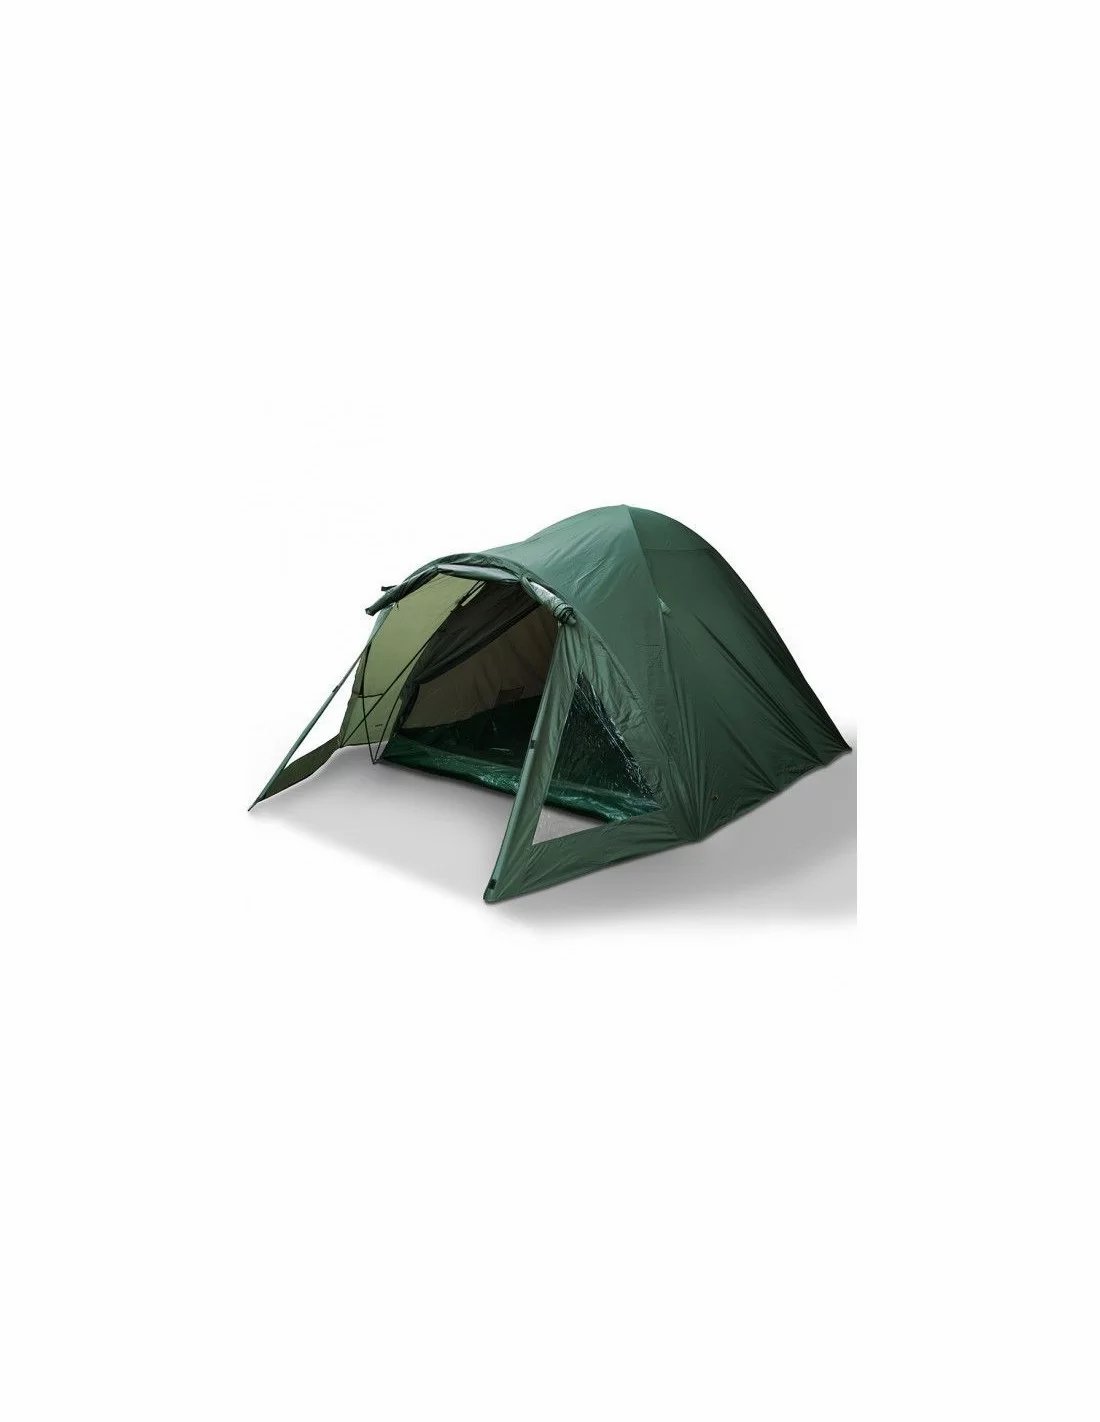 NGT 2 Man Double Skinned Bivvy палатка